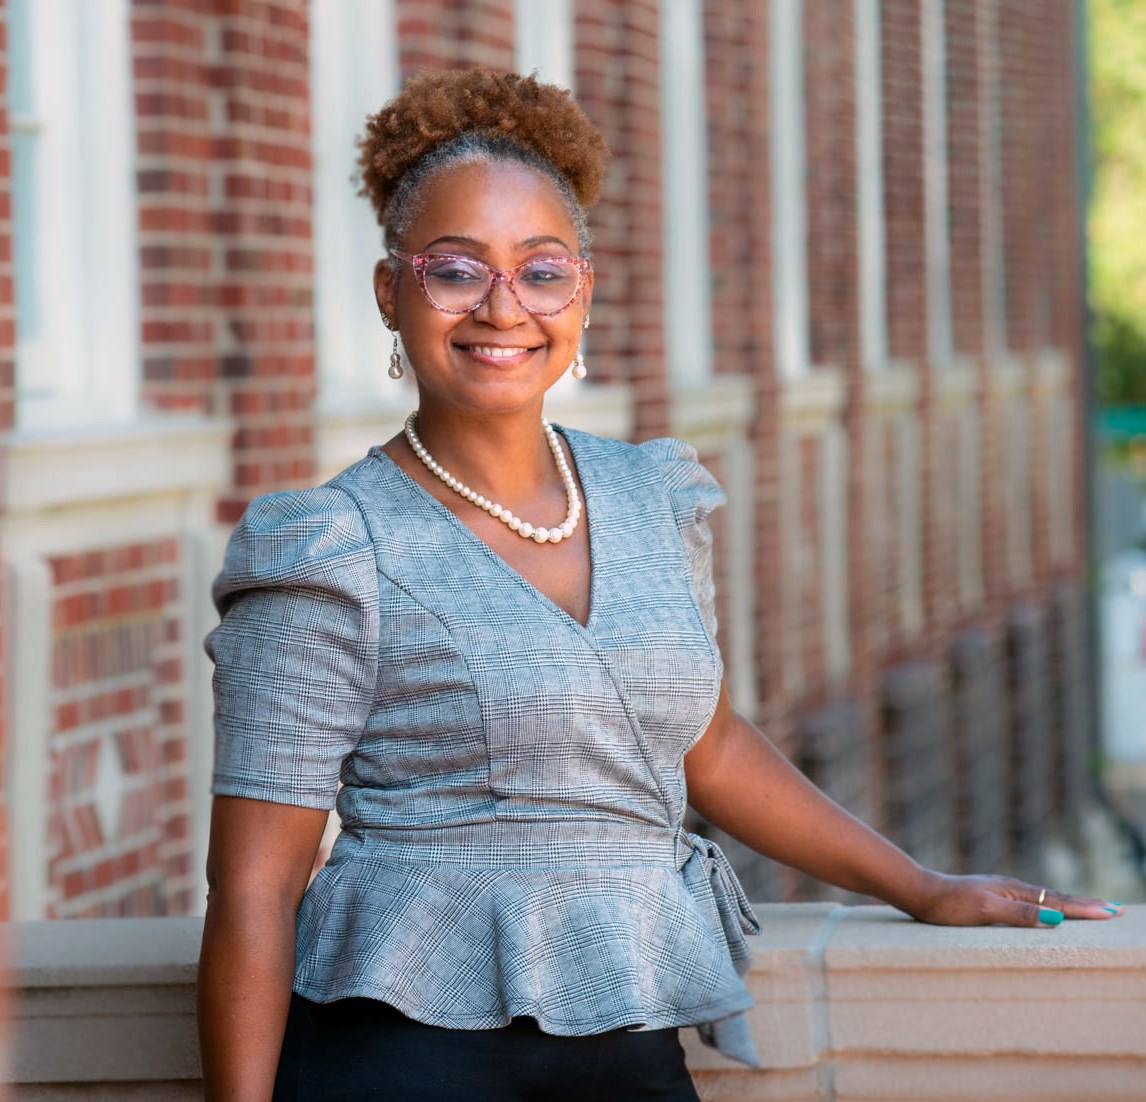 Andrea S. Boyles standing outside school building. Boyles is author of UC Press books, You Can’t Stop the Revolution: Community Disorder and Social Ties in Post-Ferguson America (2019) and Race, Place, and Suburban Policing: Too Close for Comfort (2015).  